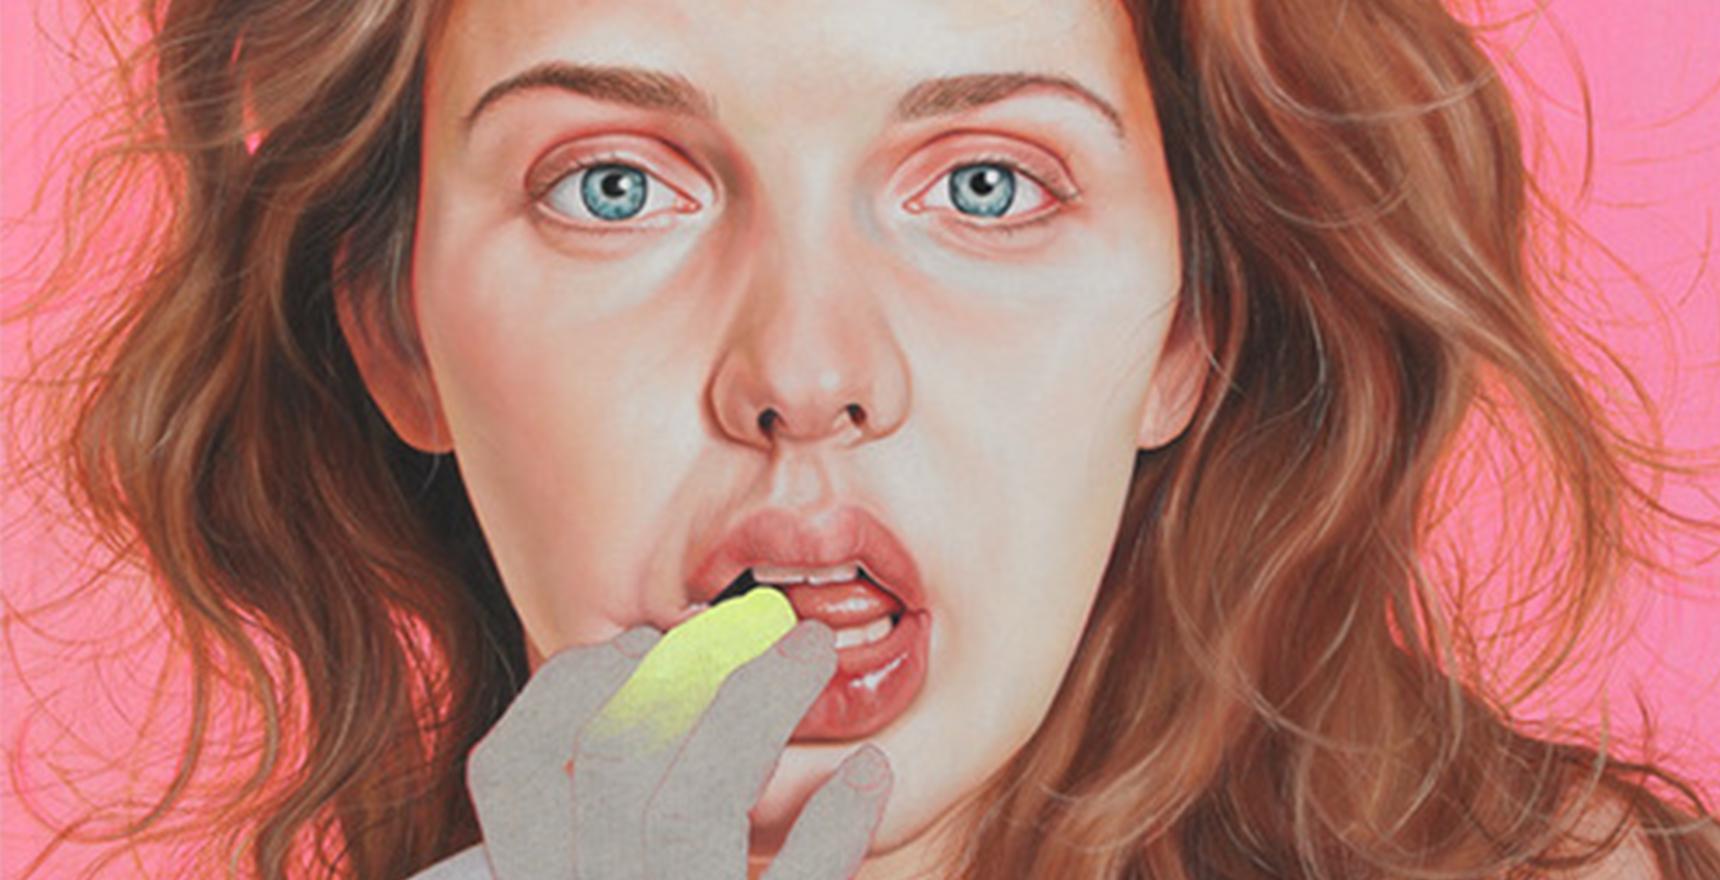 painting of a woman biting a yellow finger